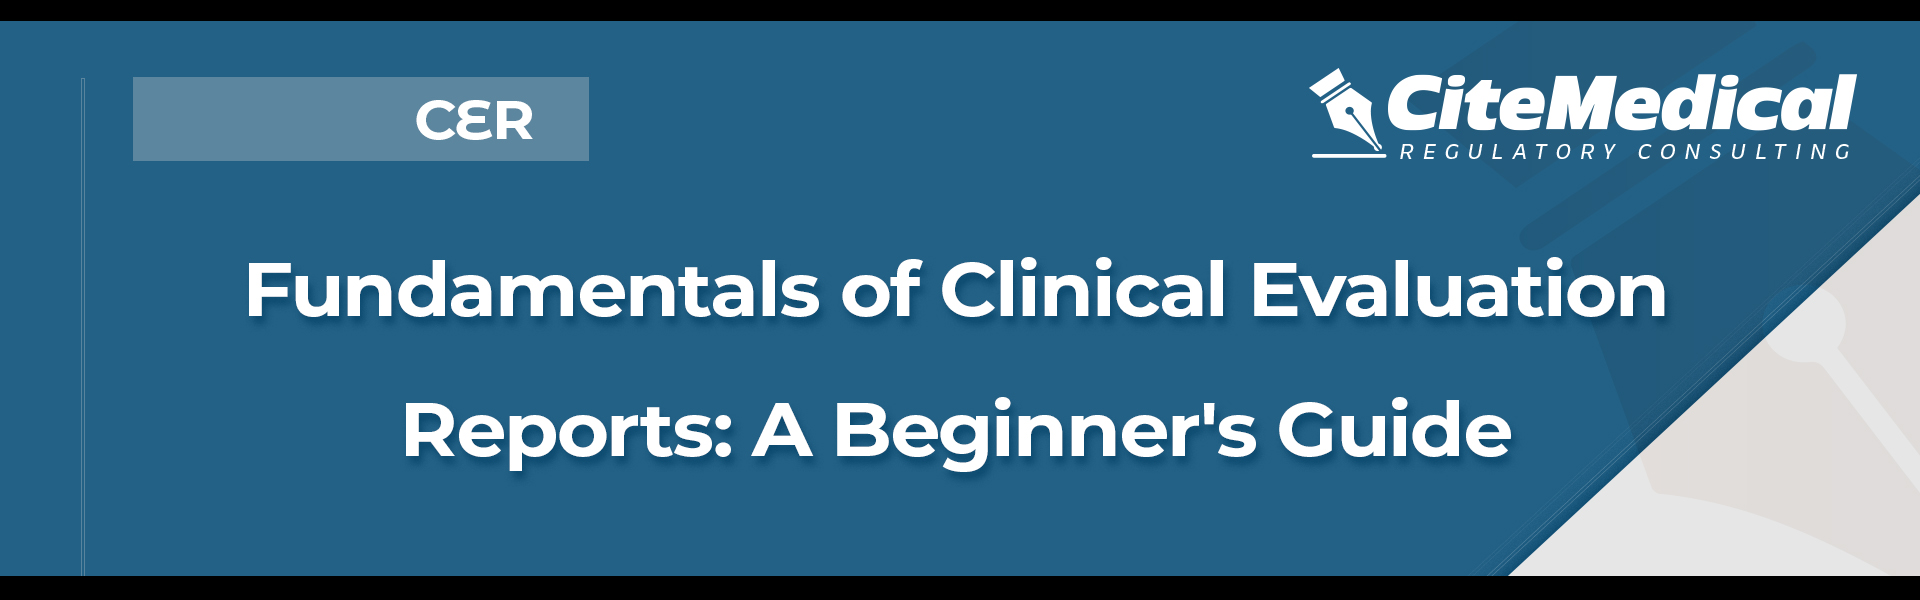 Fundamentals of Clinical Evaluation Reports